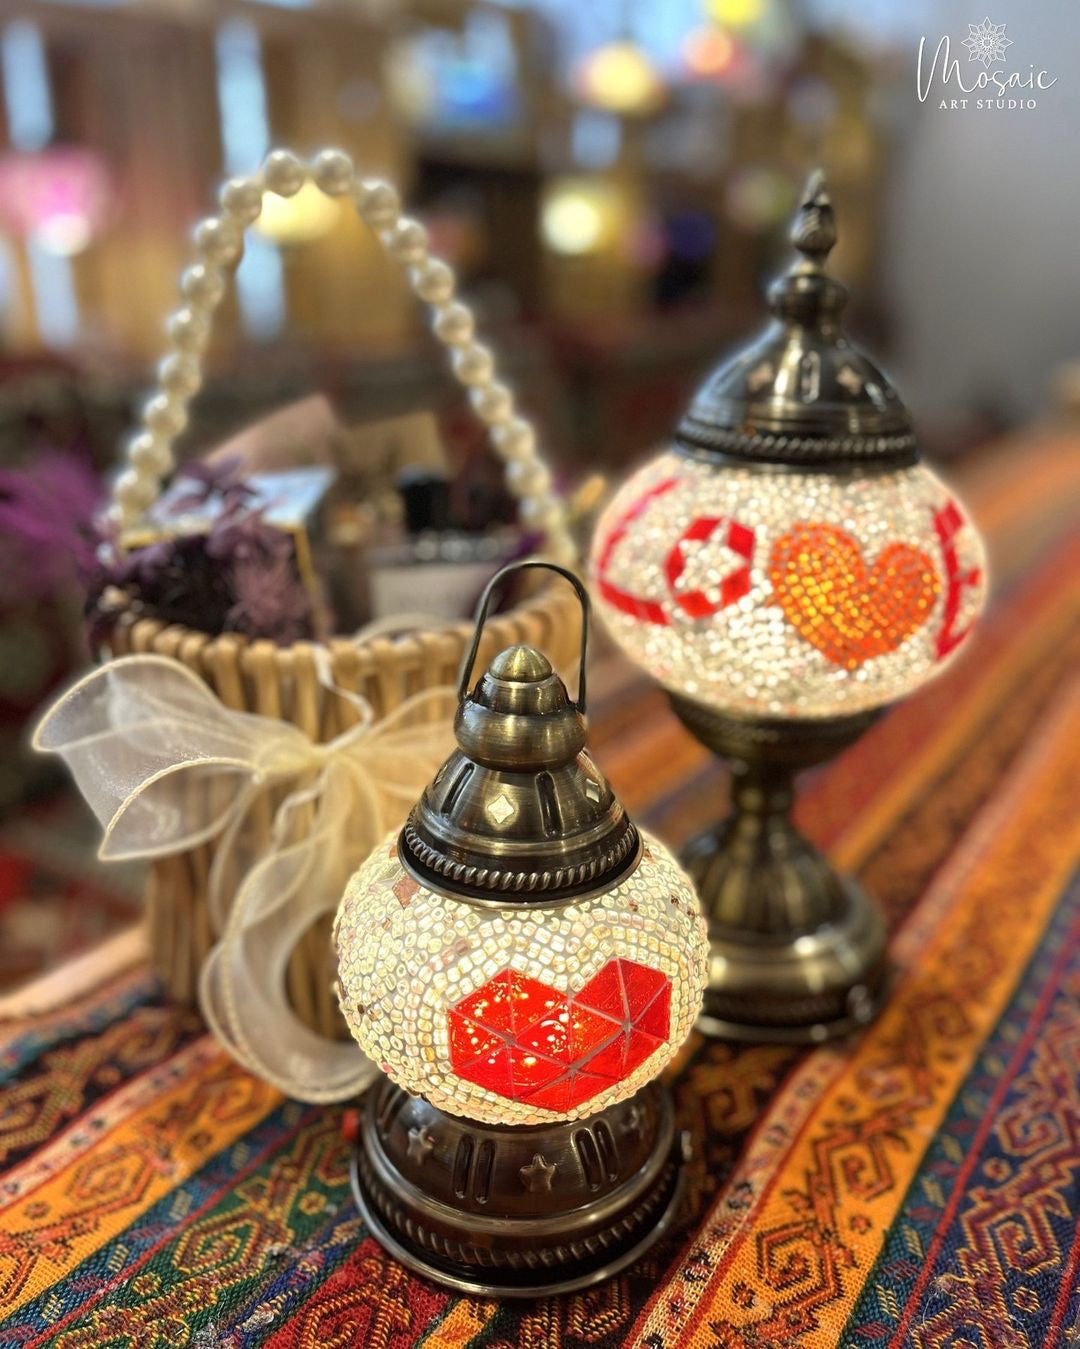 turkish mosaic lamp with heart pattern and with the word "Love"